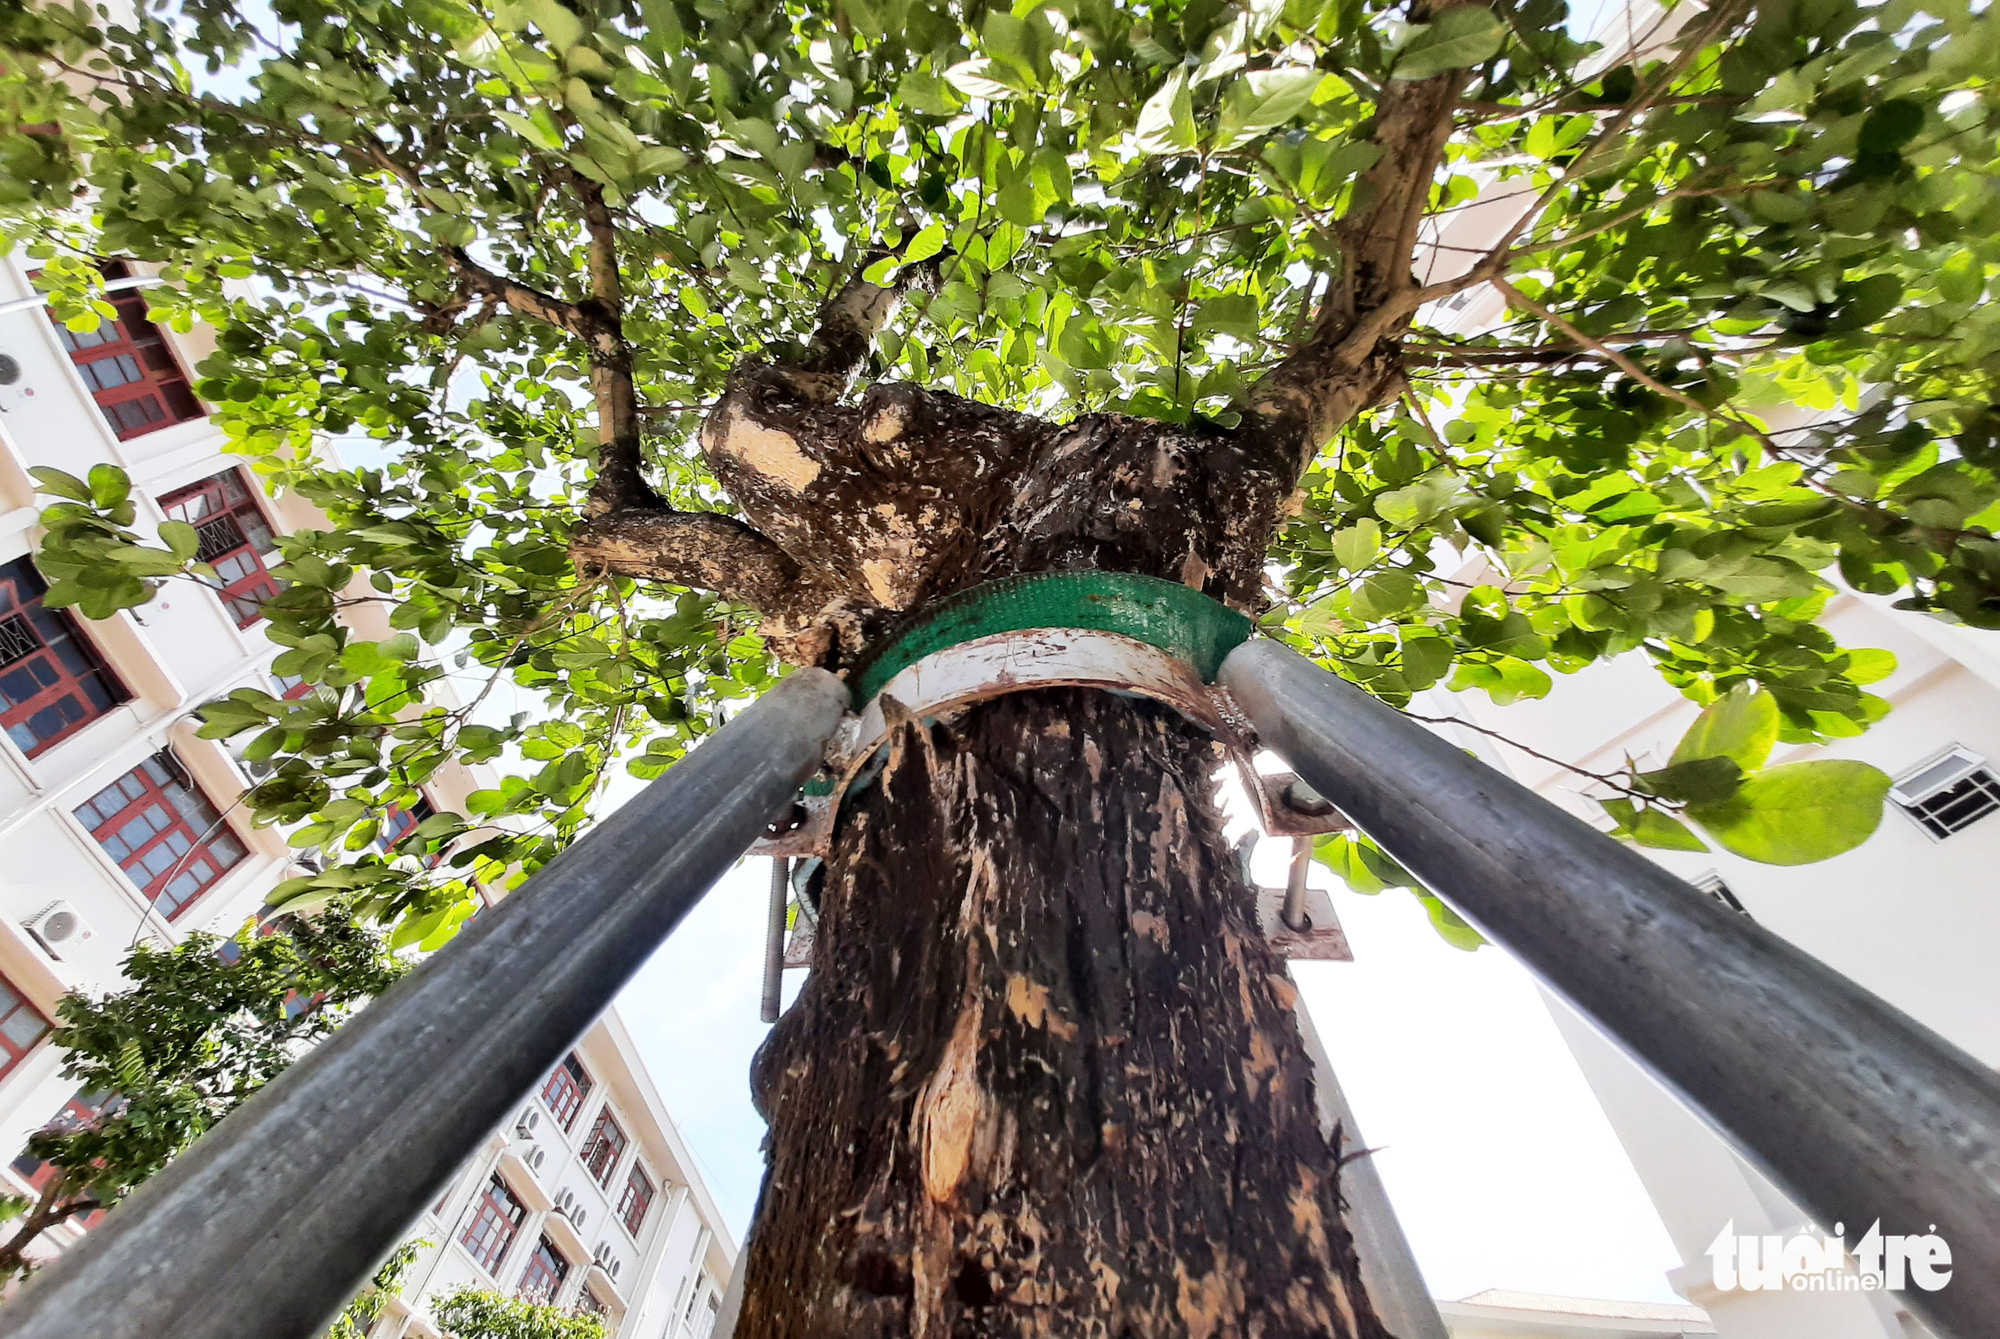 Vietnam schools give green trees ‘armor’ for safety in rainy season